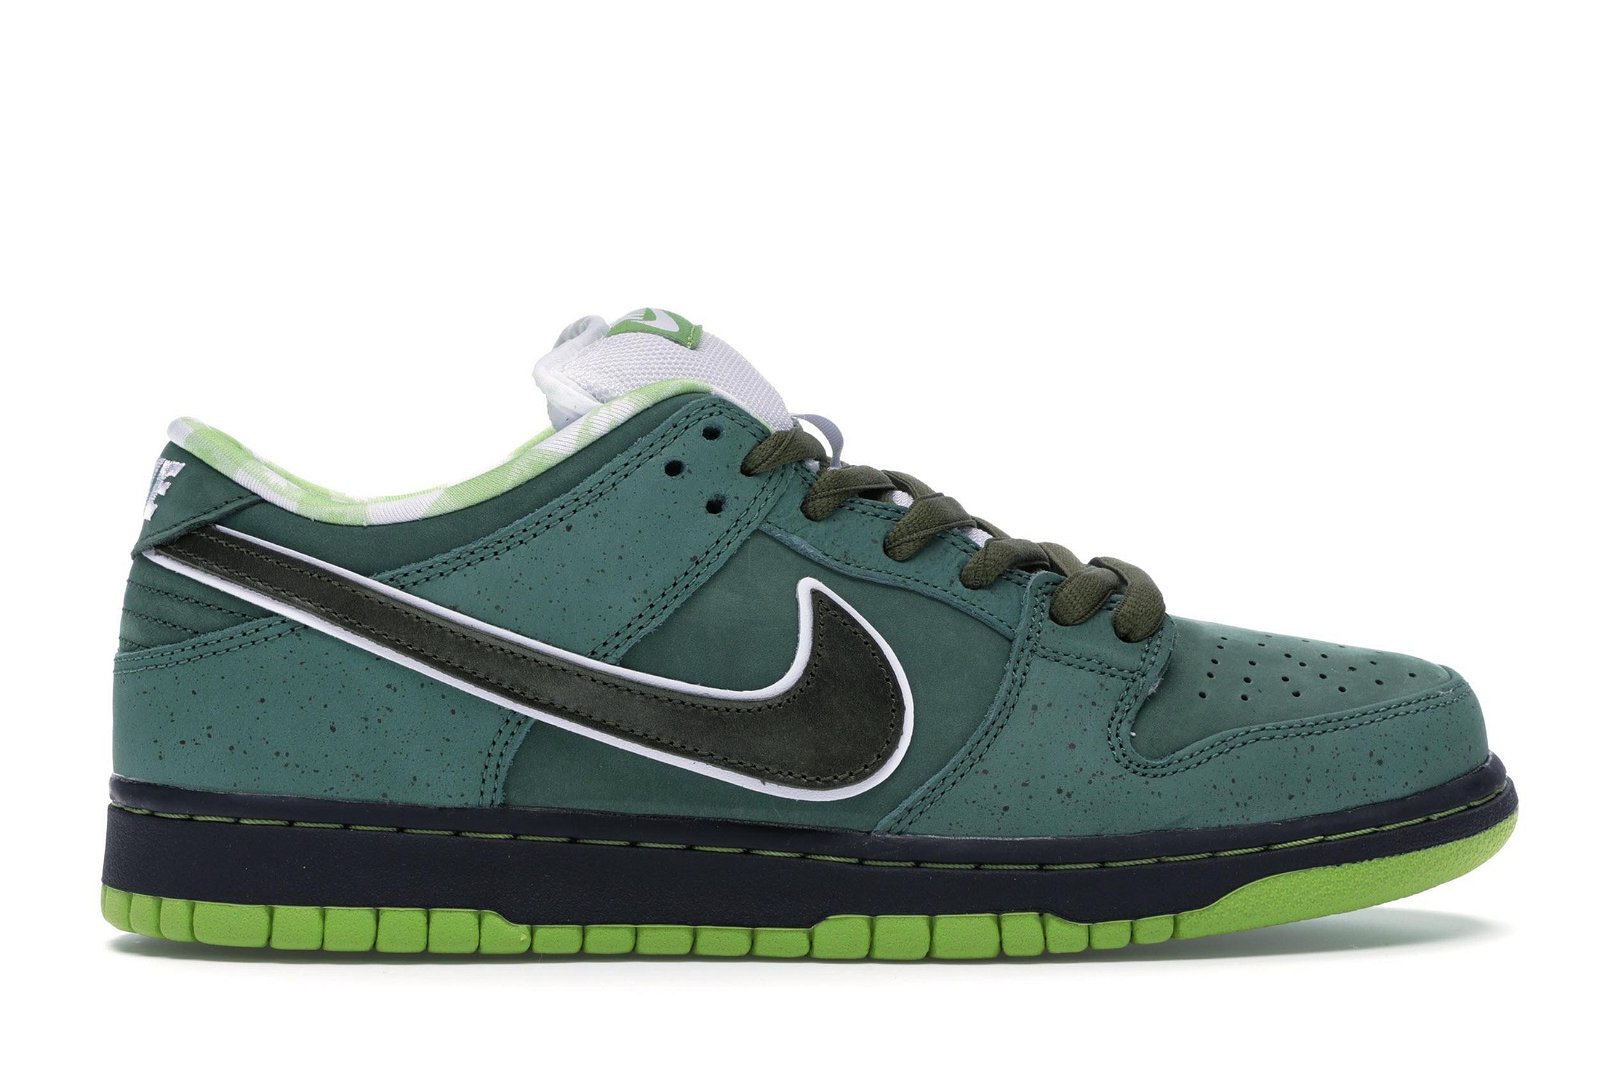 Nike SB Dunk Low Concepts Green Lobster (Regular Box) sneakers